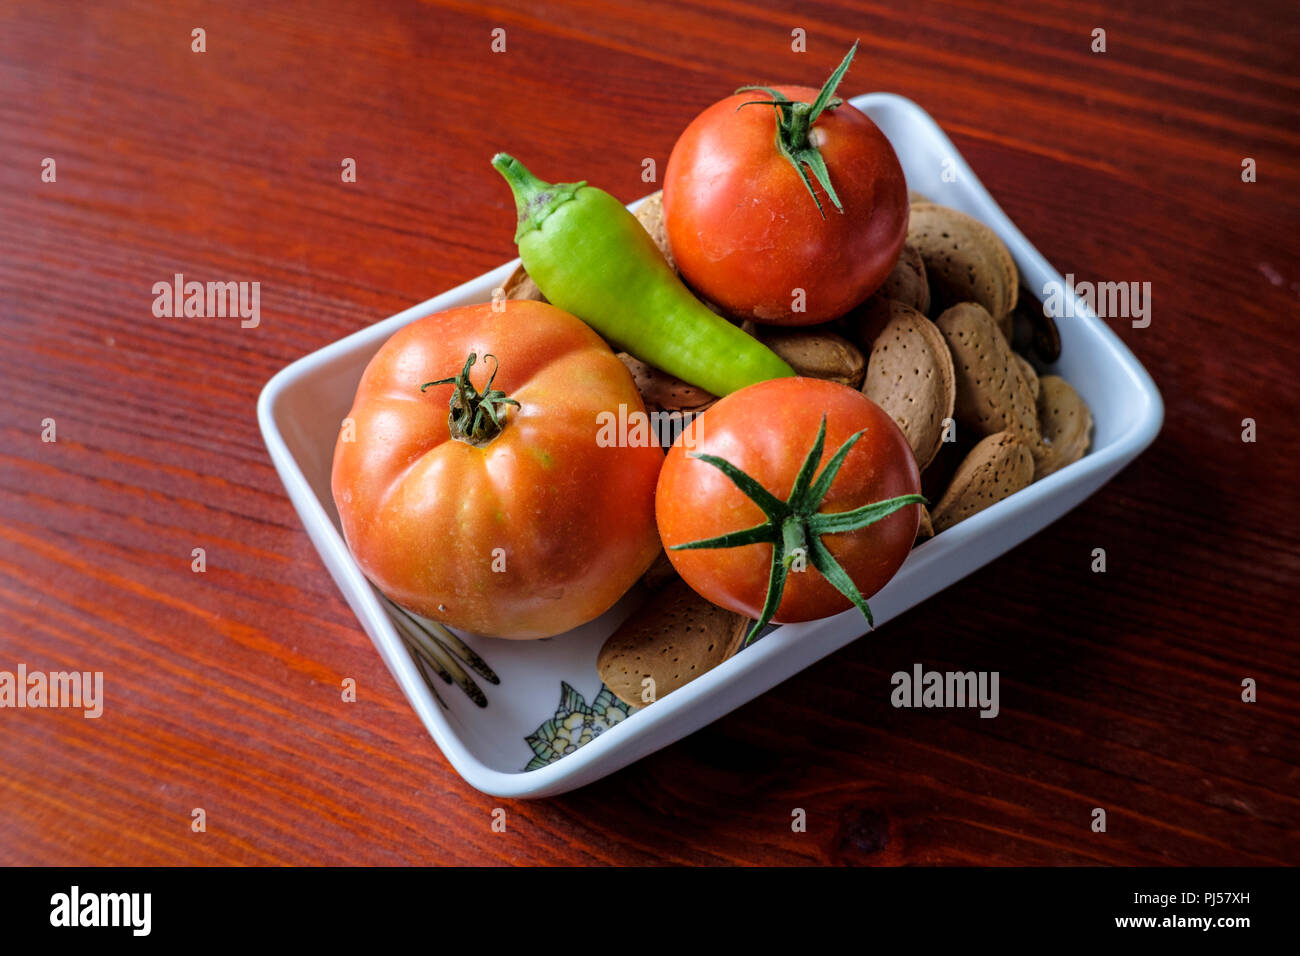 Tomatoes, peppers and almonds on a wooden table Stock Photo